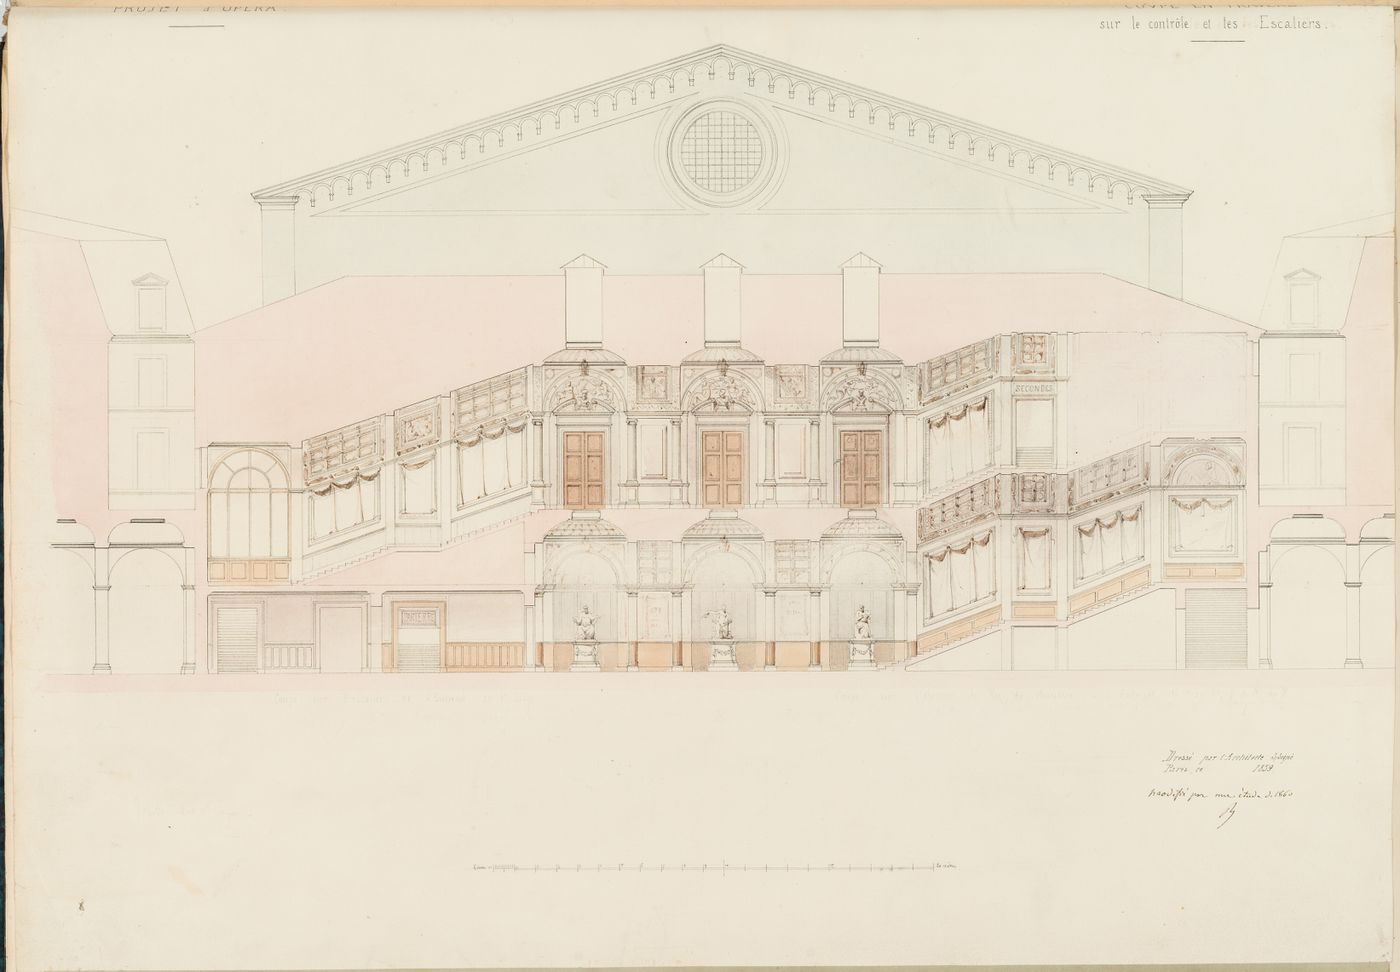 Project for an opera house for the Théâtre impérial de l'opéra: Cross section through the ground floor and "entresol" stairs